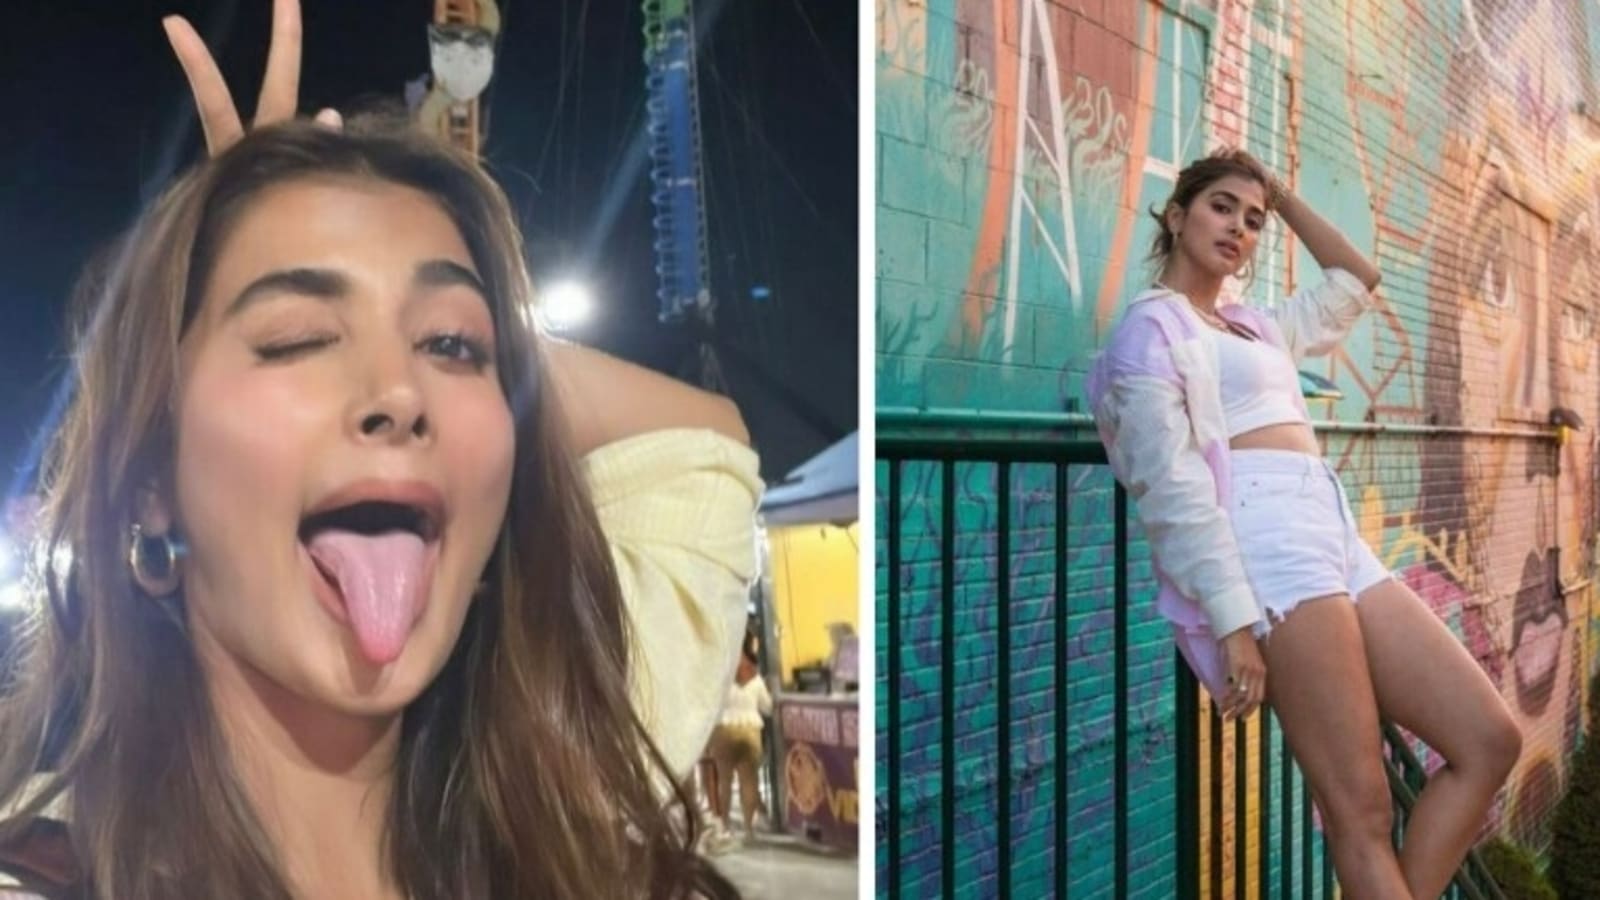 Pooja Hegde goes to amusement park, shares fun pics from New York holiday: ‘Let the adventure begin’